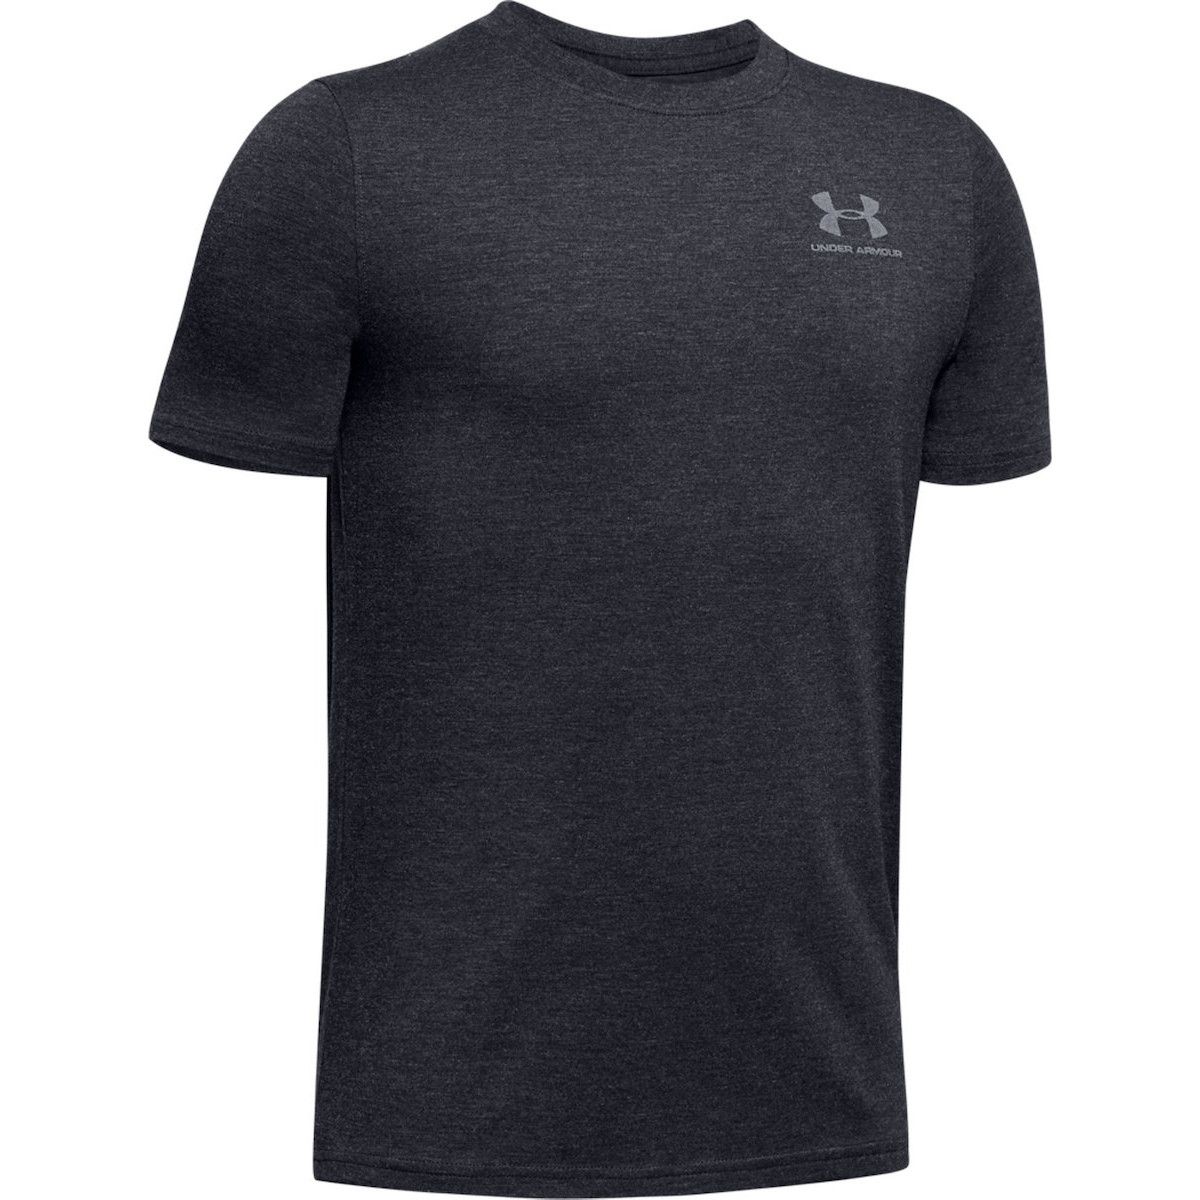 Under Armour Charged Cotton Boy's Short Sleeve Shirt 1347096